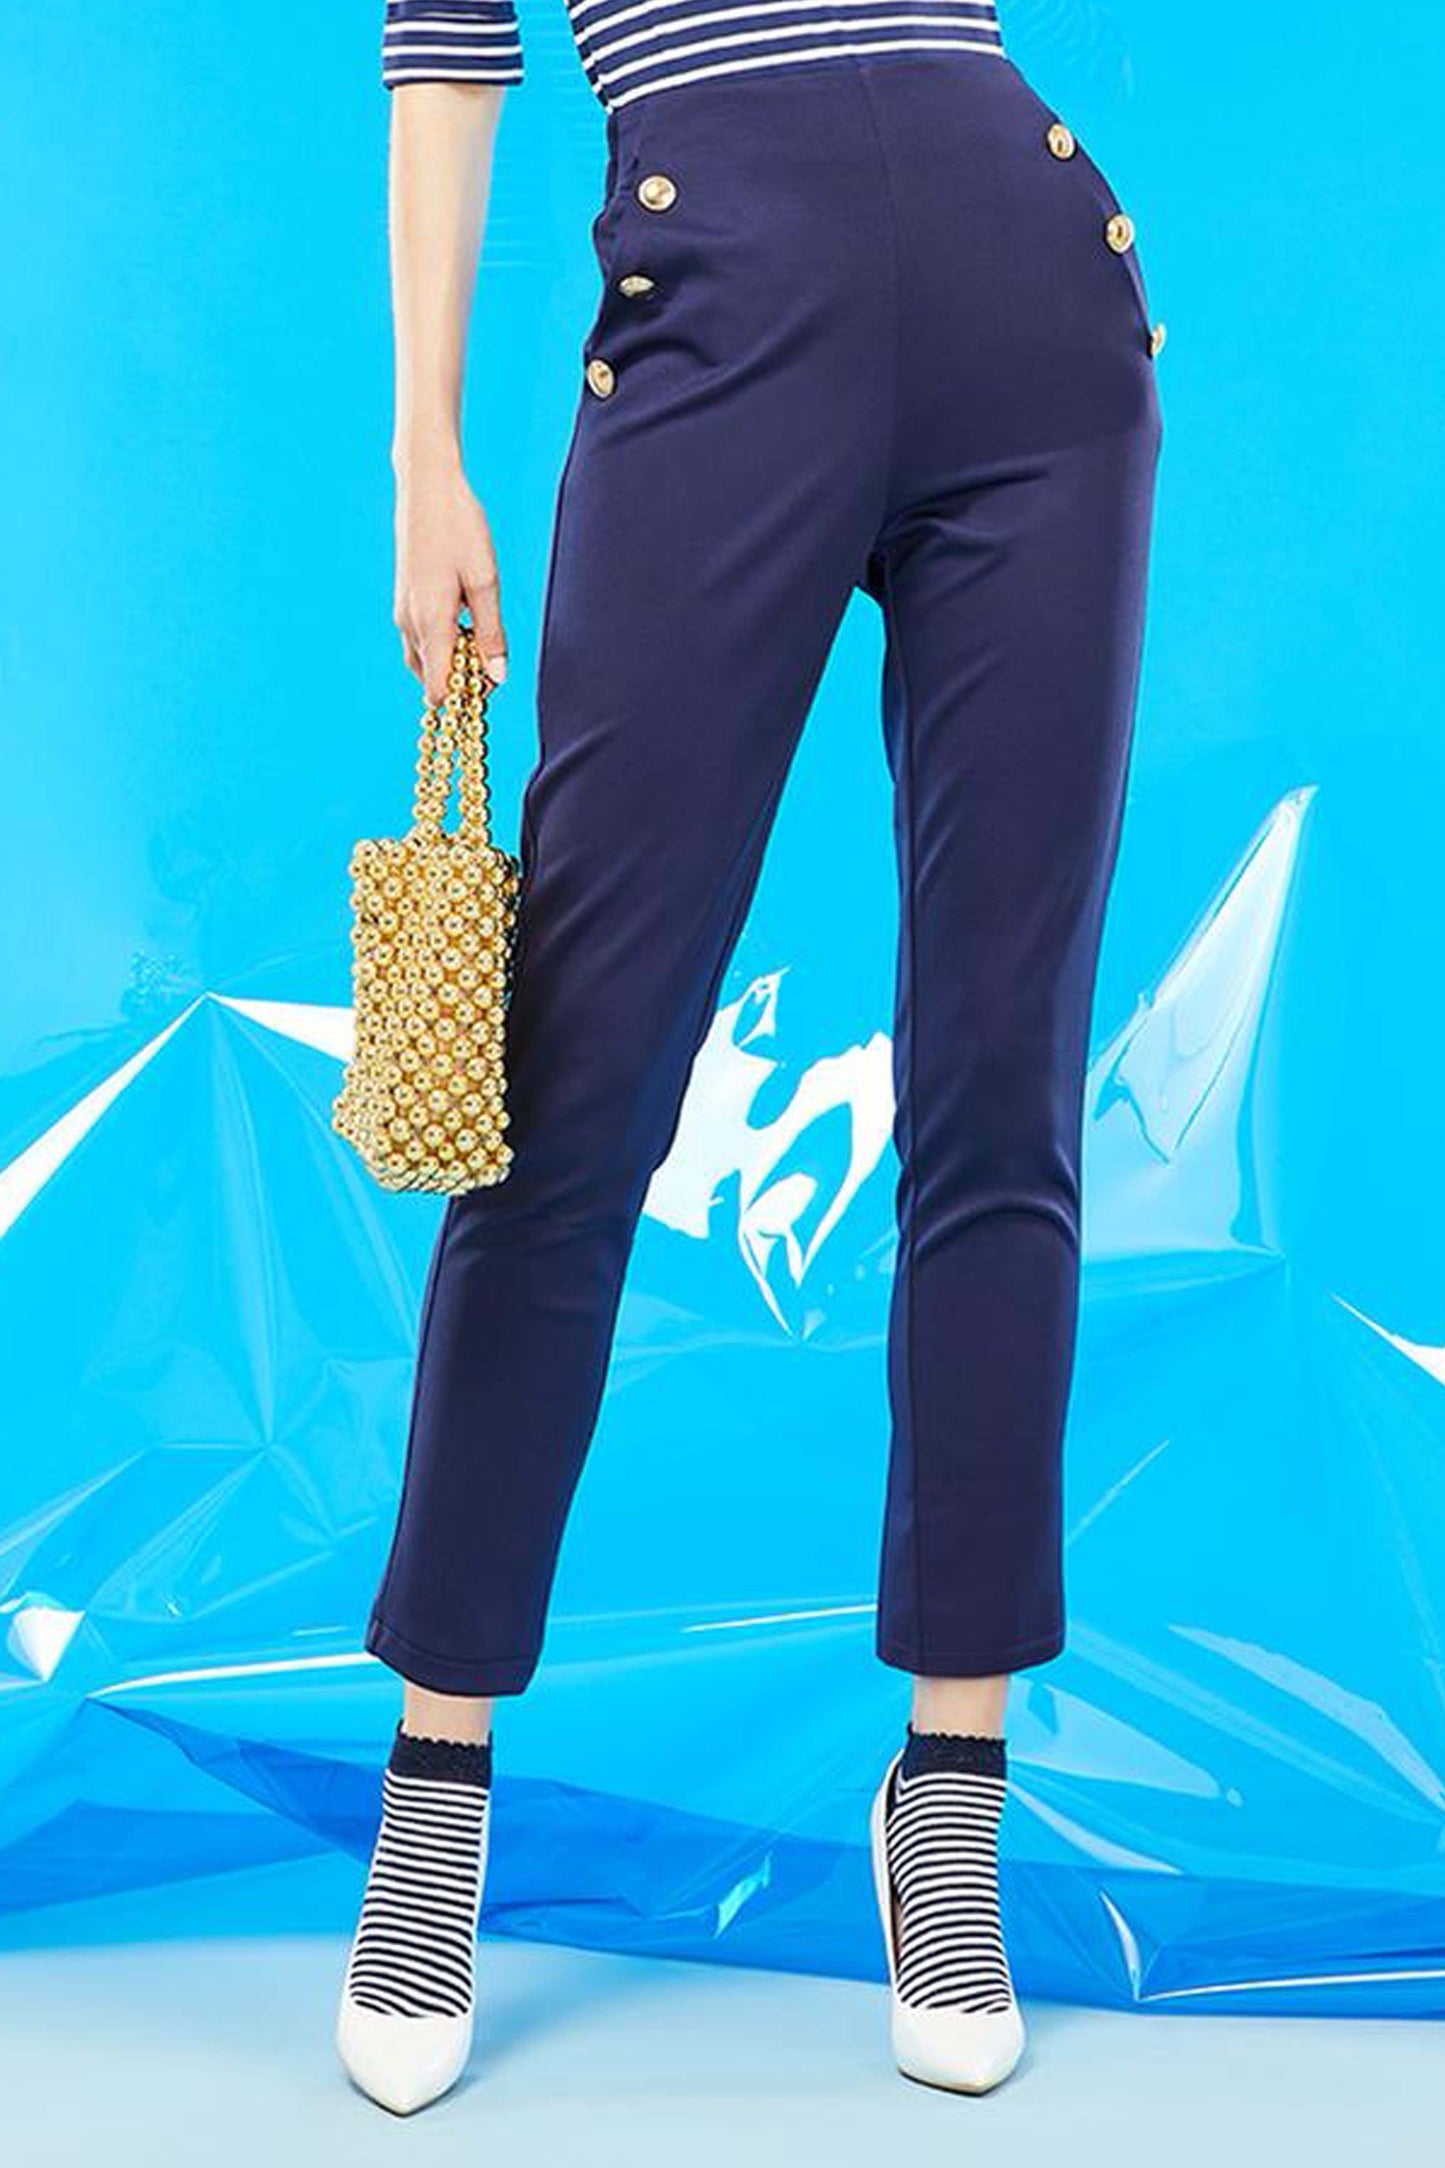 SiSi Brigitte Trouser - High waisted navy blue trouser leggings with elasticated waist band on the back, side pockets and big gold button details along the pockets. Worn with a stripe top, low ankle socks and white high heels.